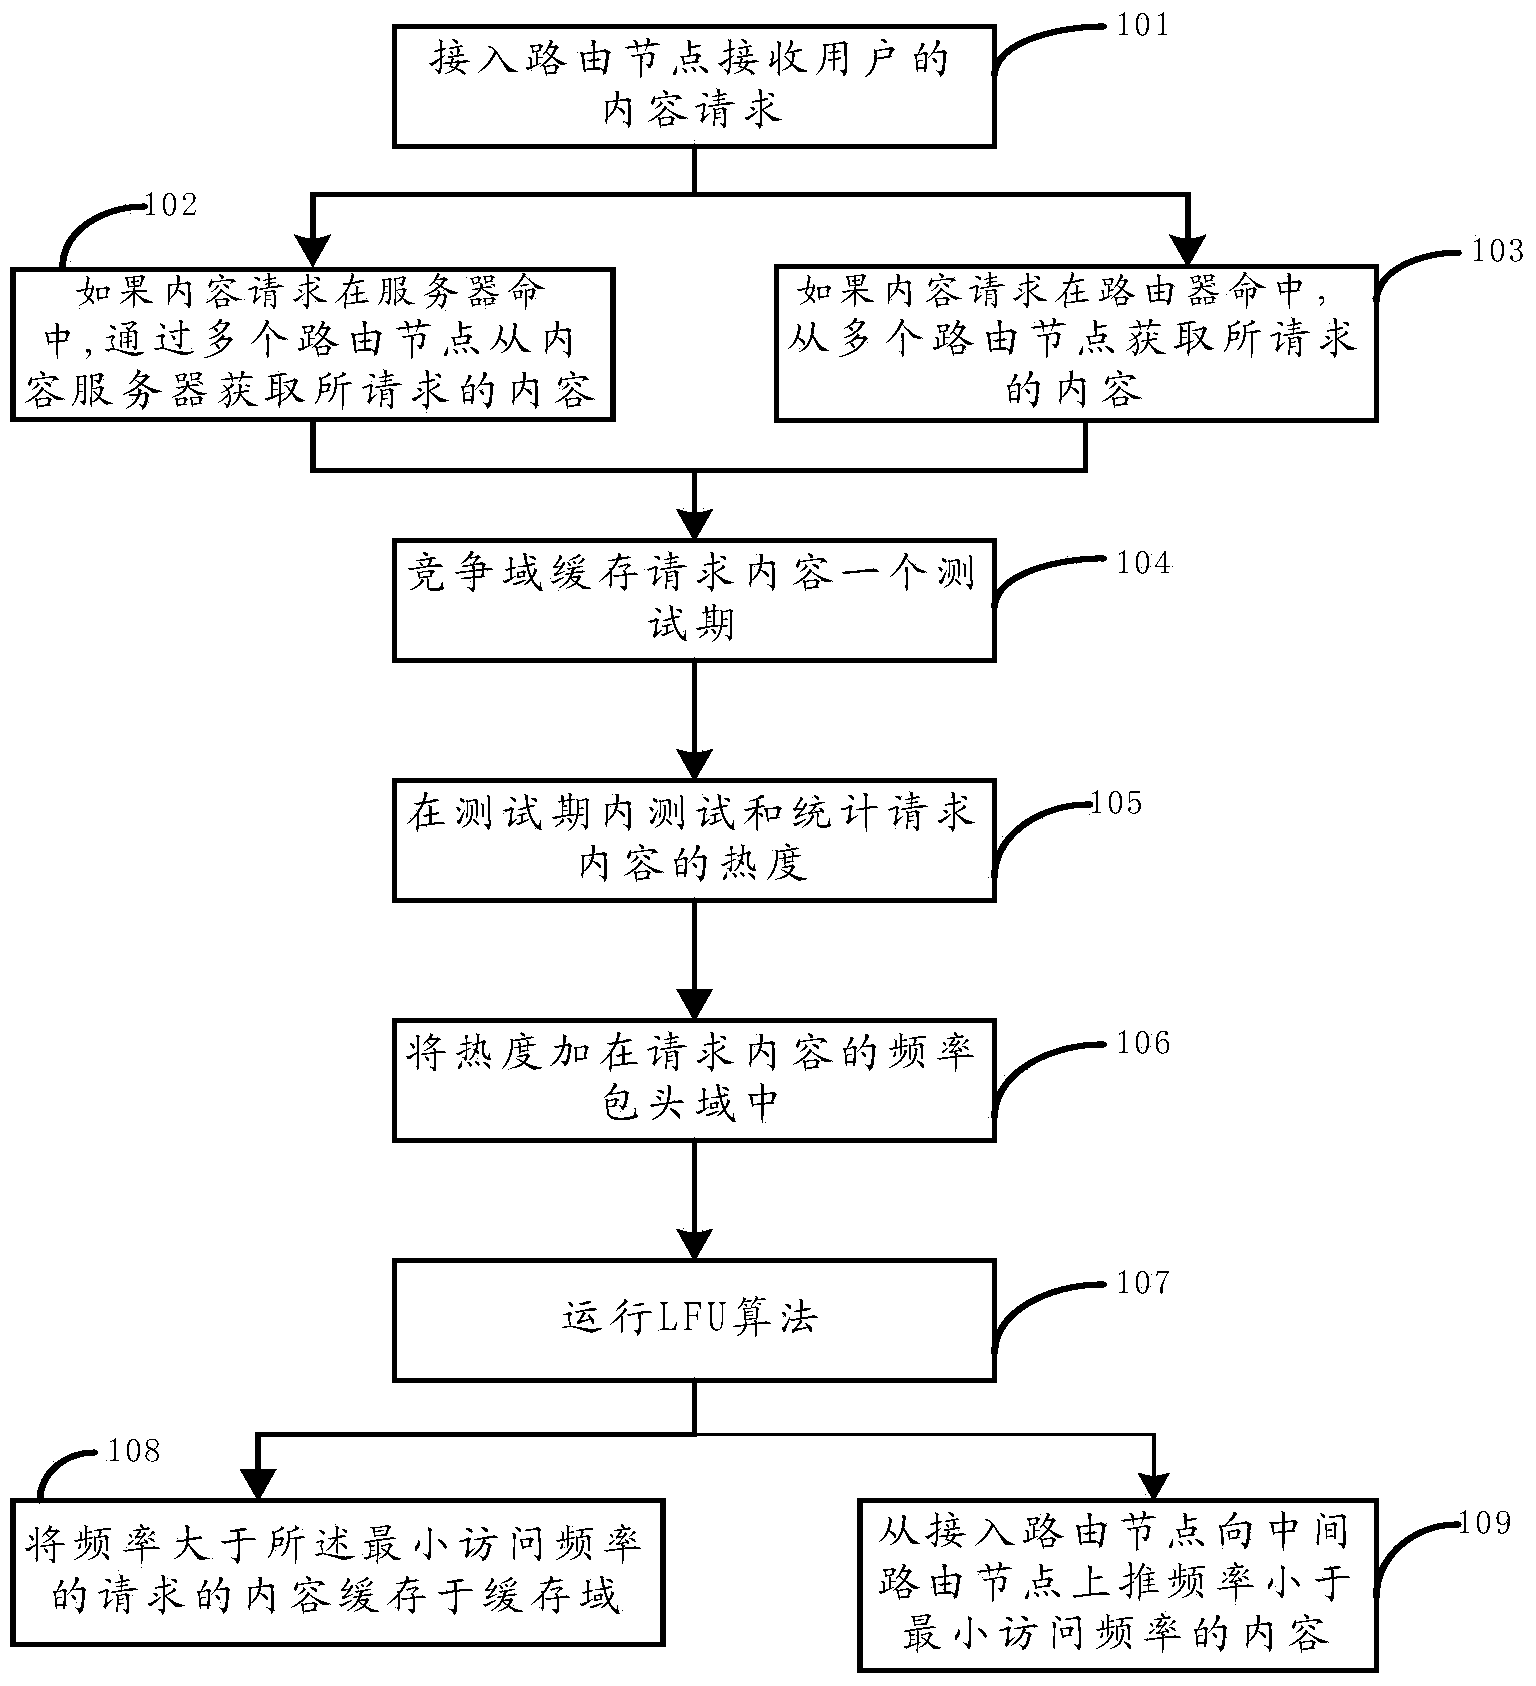 Self-aggregation cooperative caching method in CCN